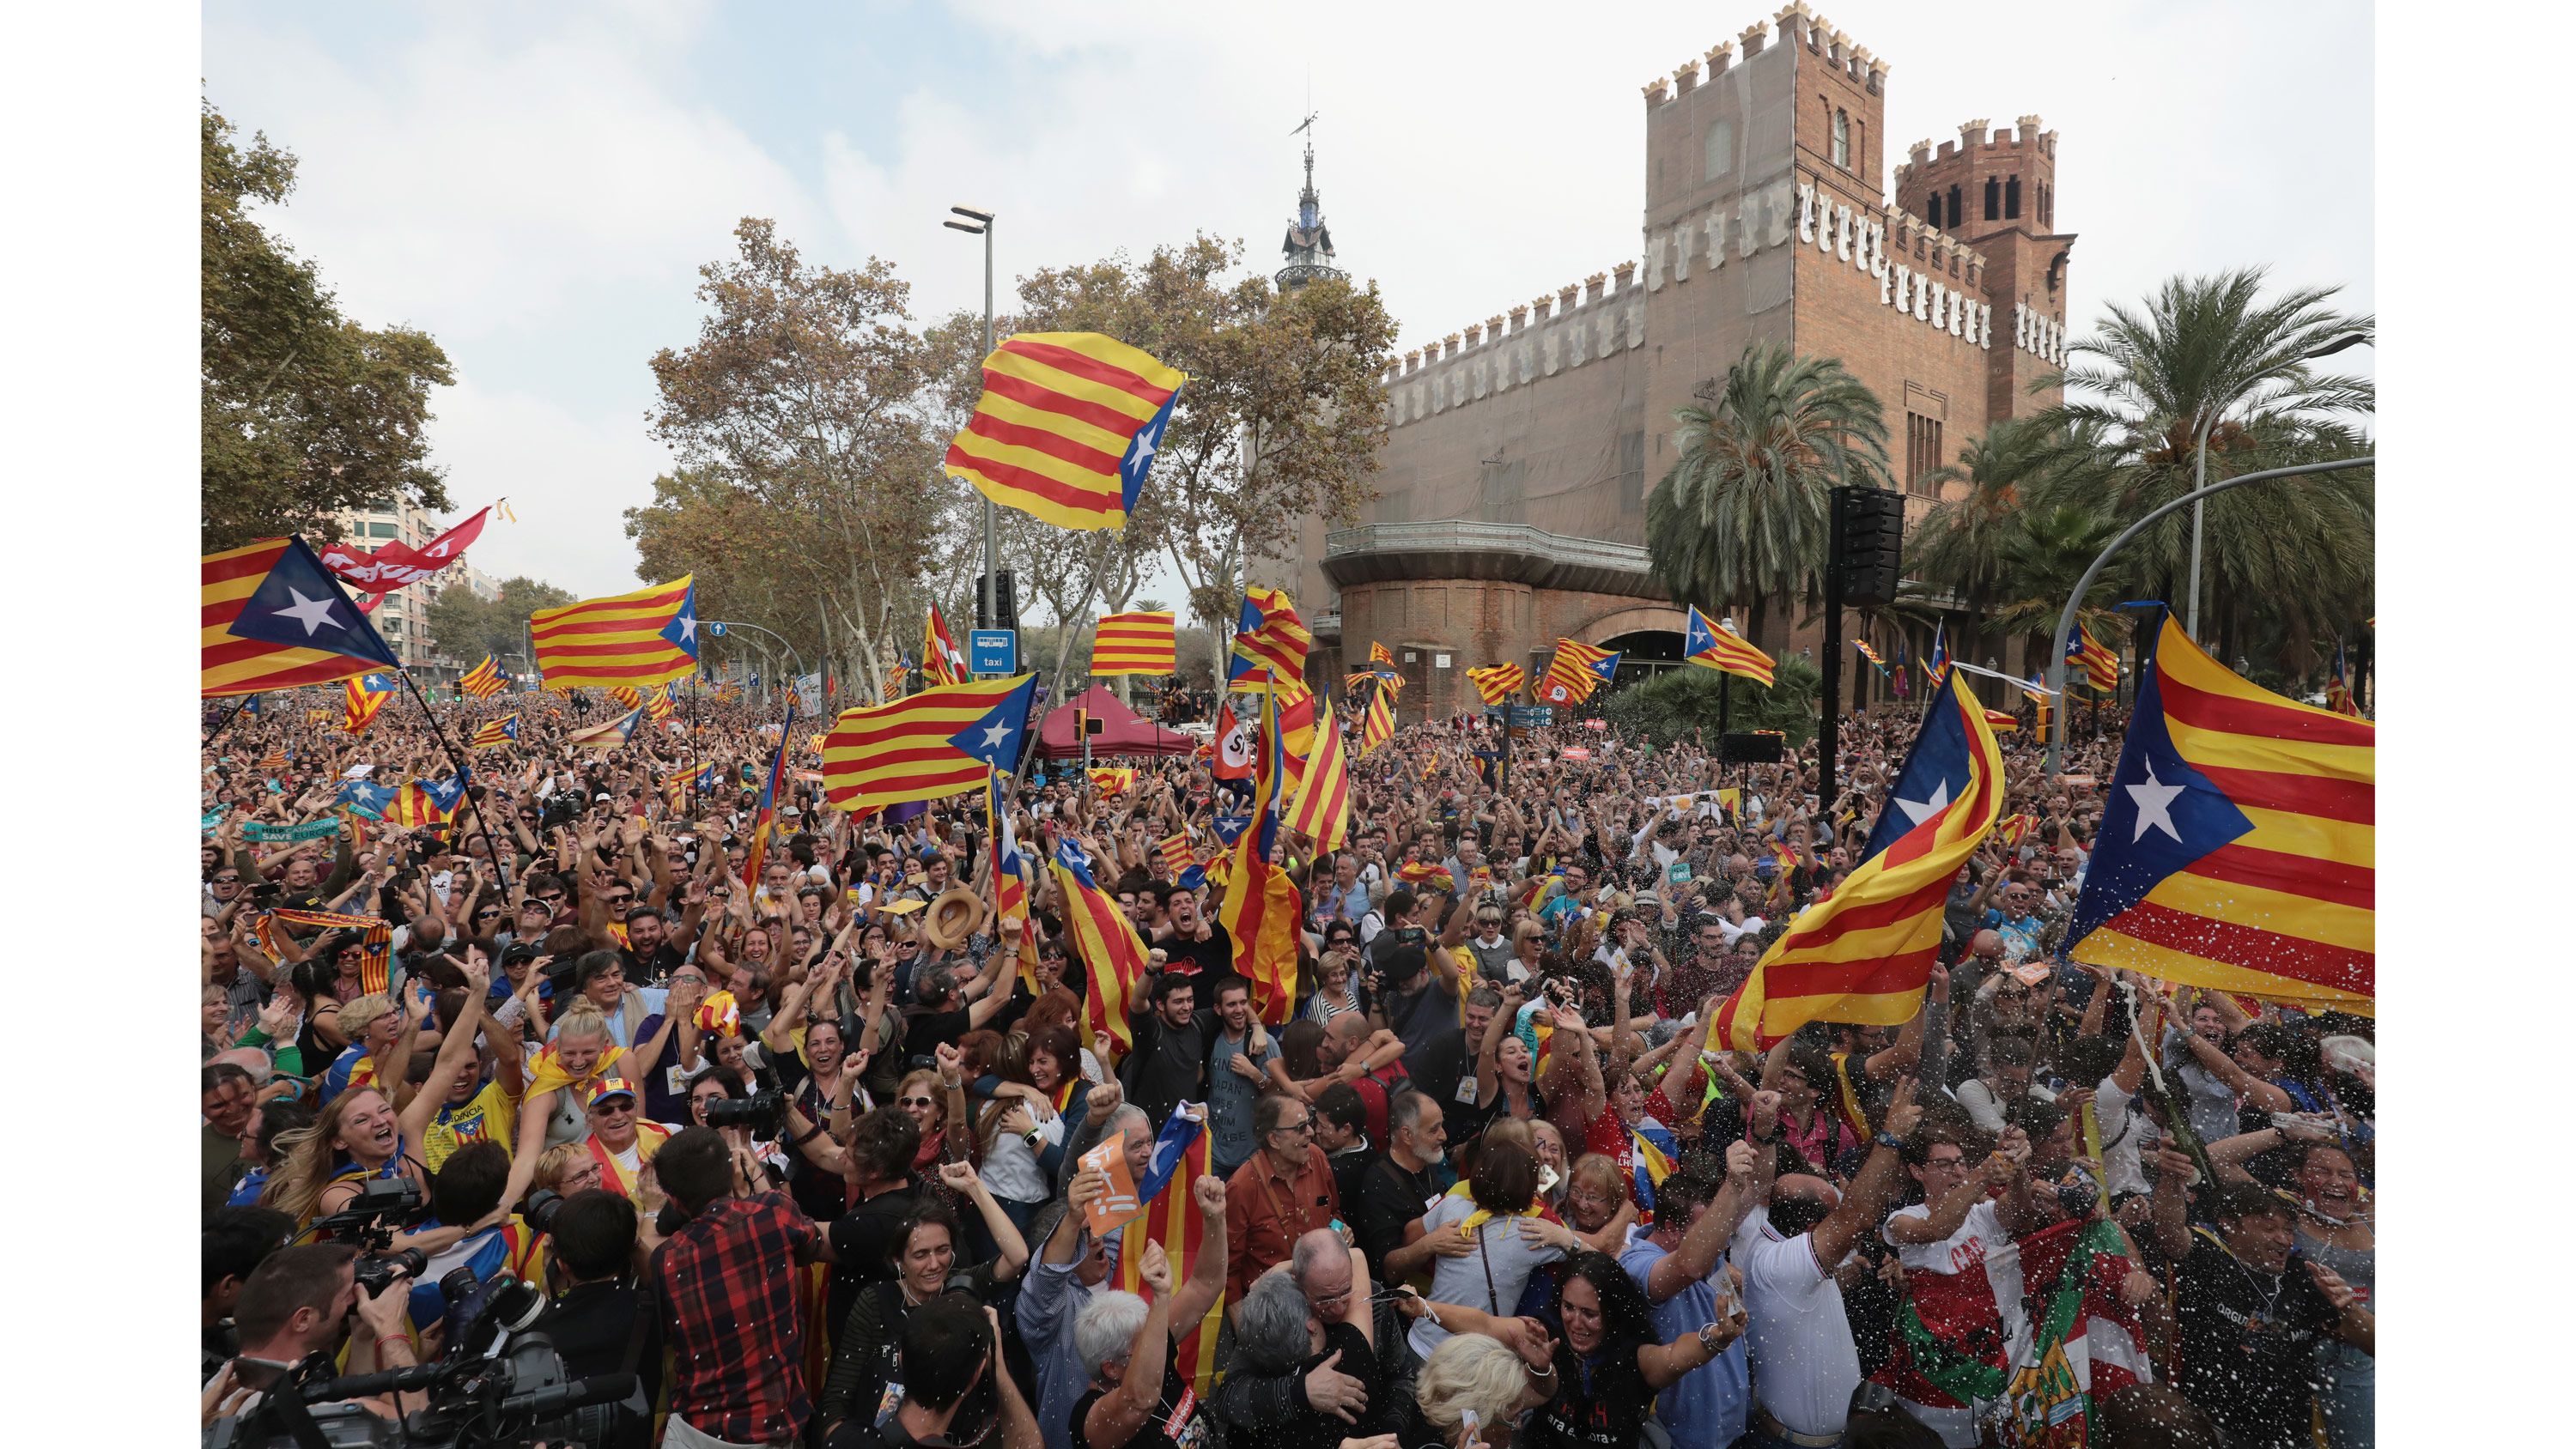 Church bells in Catalan town chime again after residents' pot-banging  protests, Catalonia